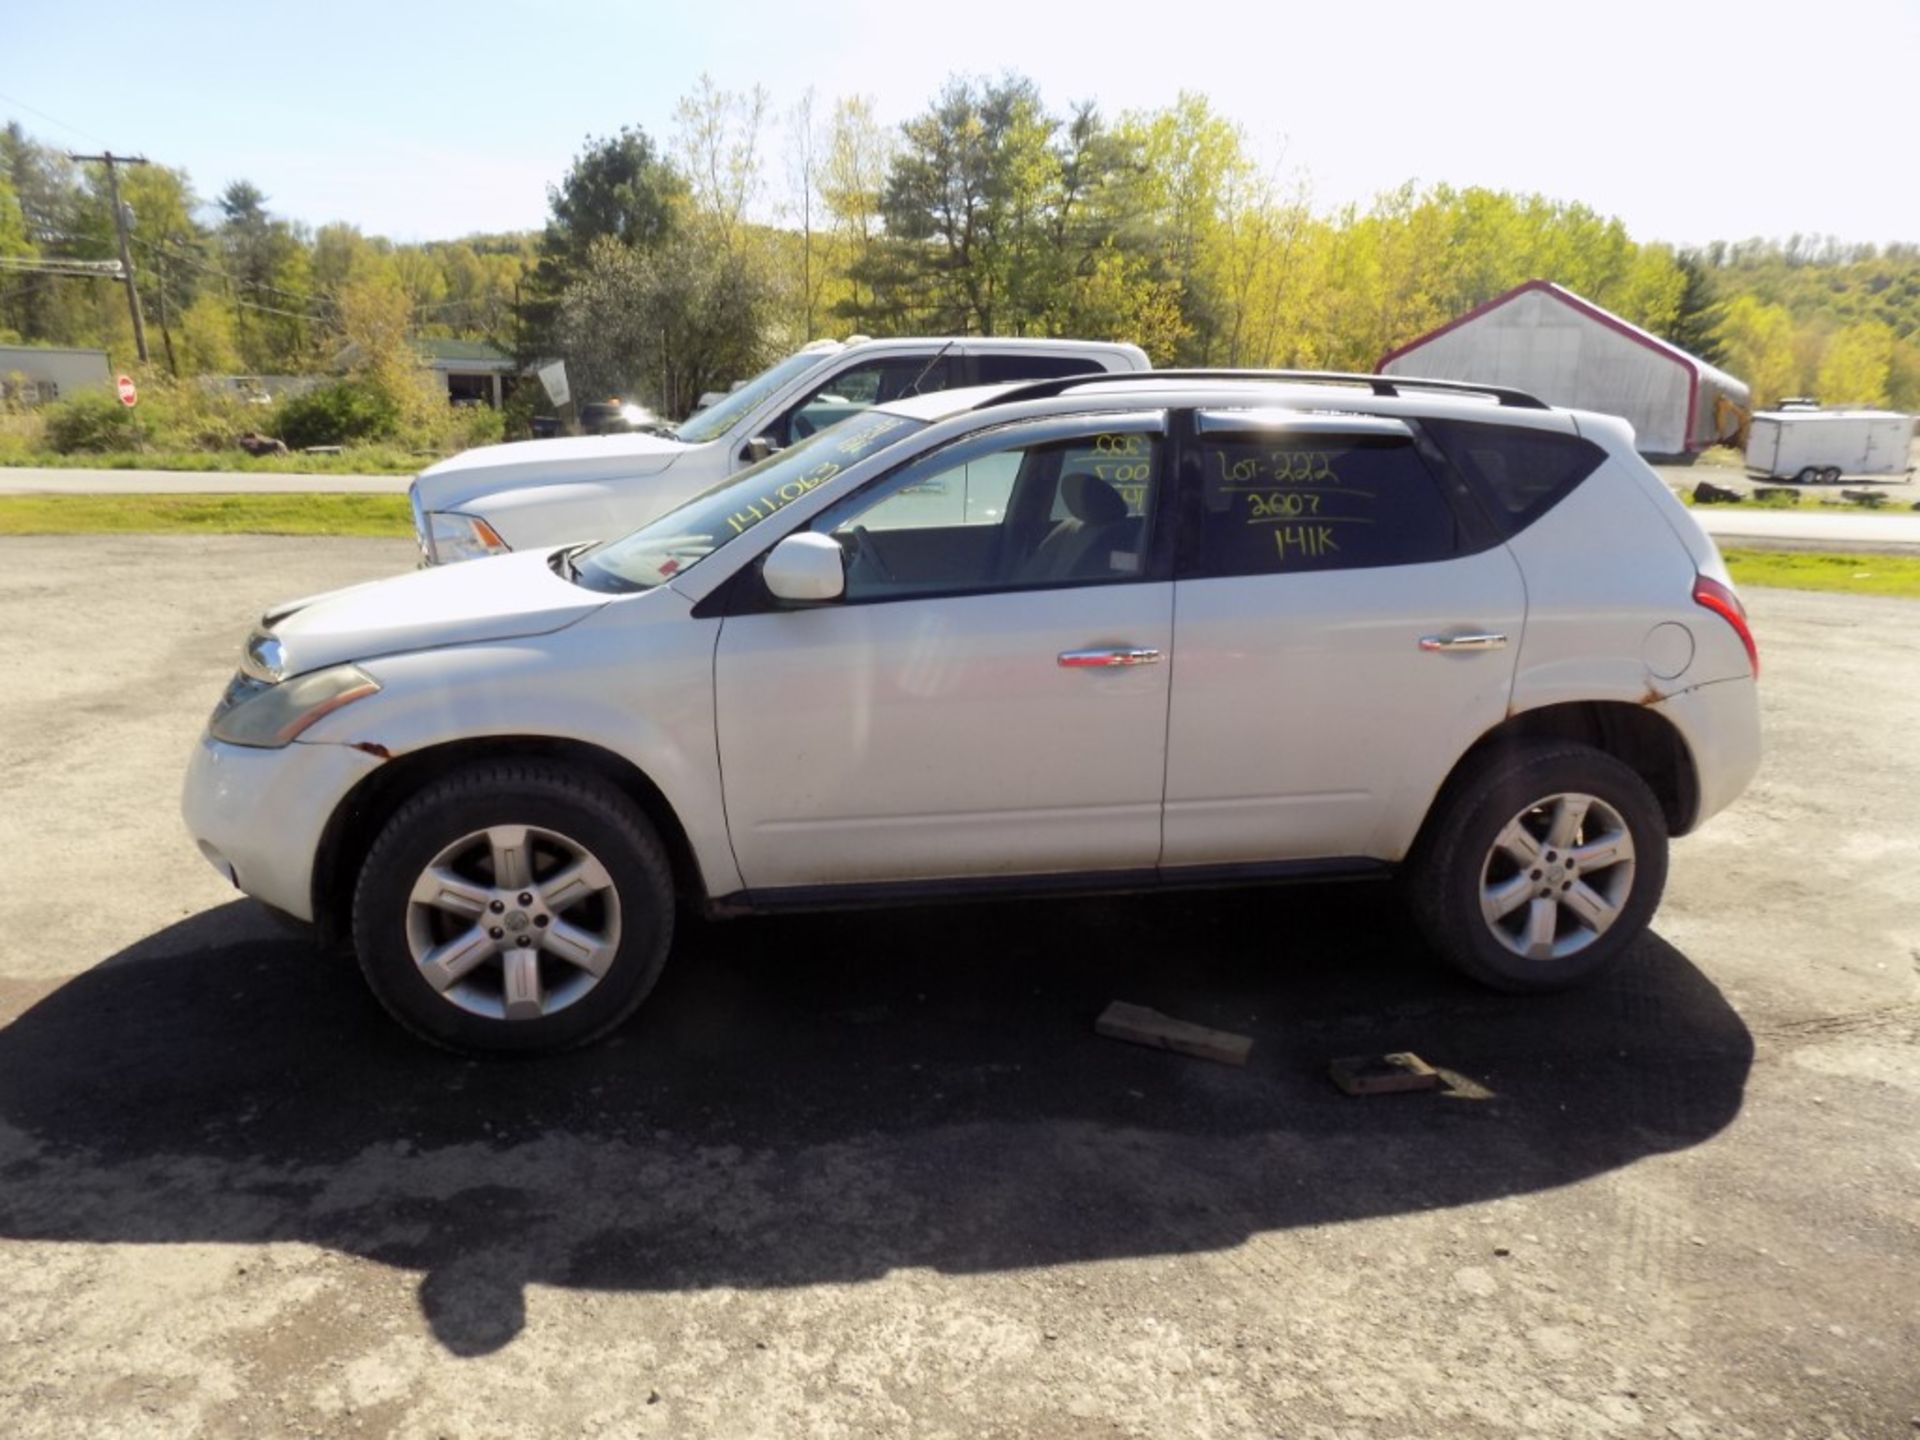 2007 Nissan Murano S AWD, White, 141,063, Vin# JN8AZ08WX7W643230 - OPEN TO ALL BUYERS, - Image 2 of 4